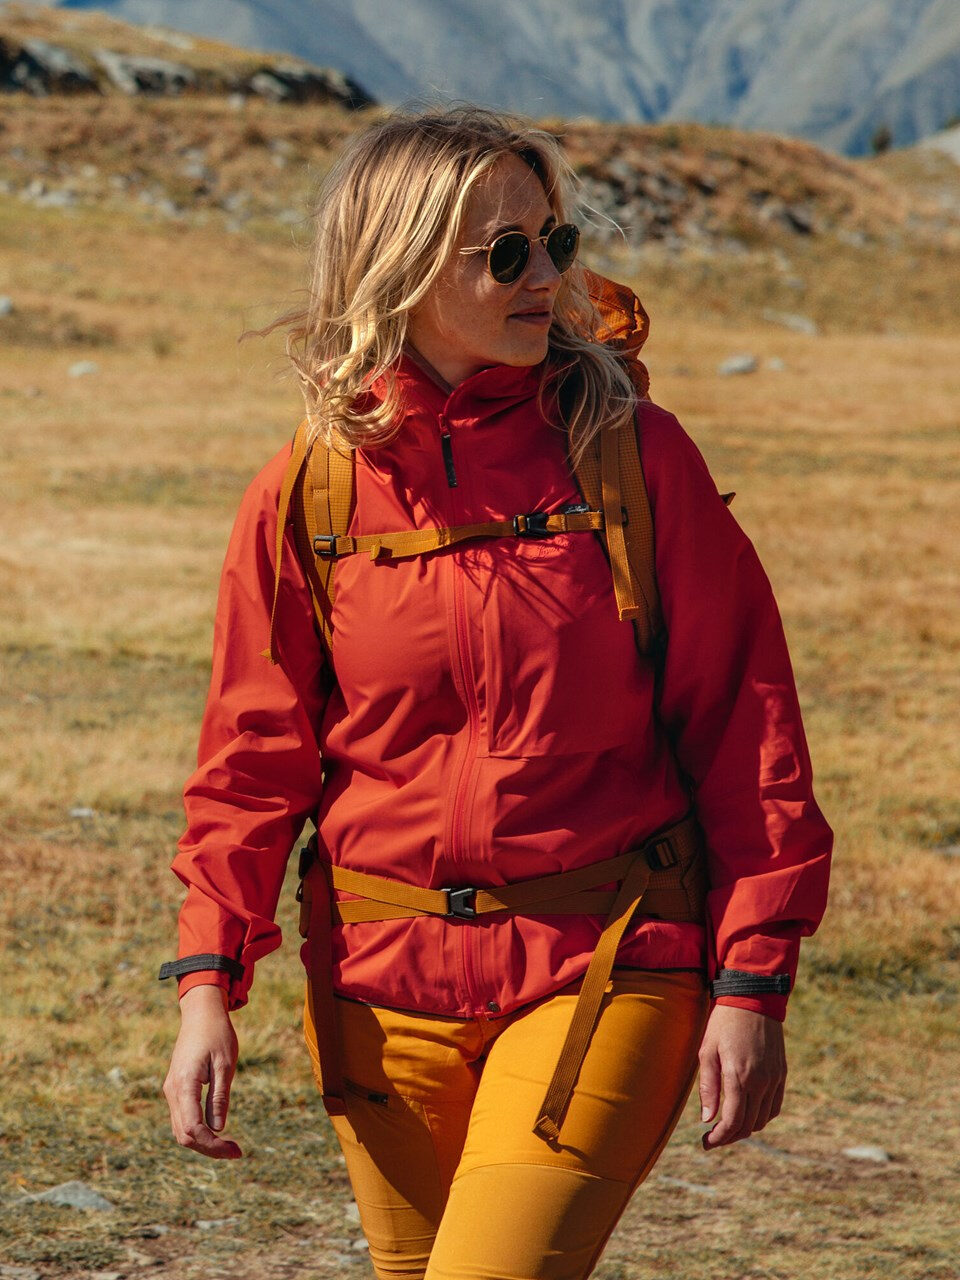 A woman in a red jacket walking through a field with mountains in the background.